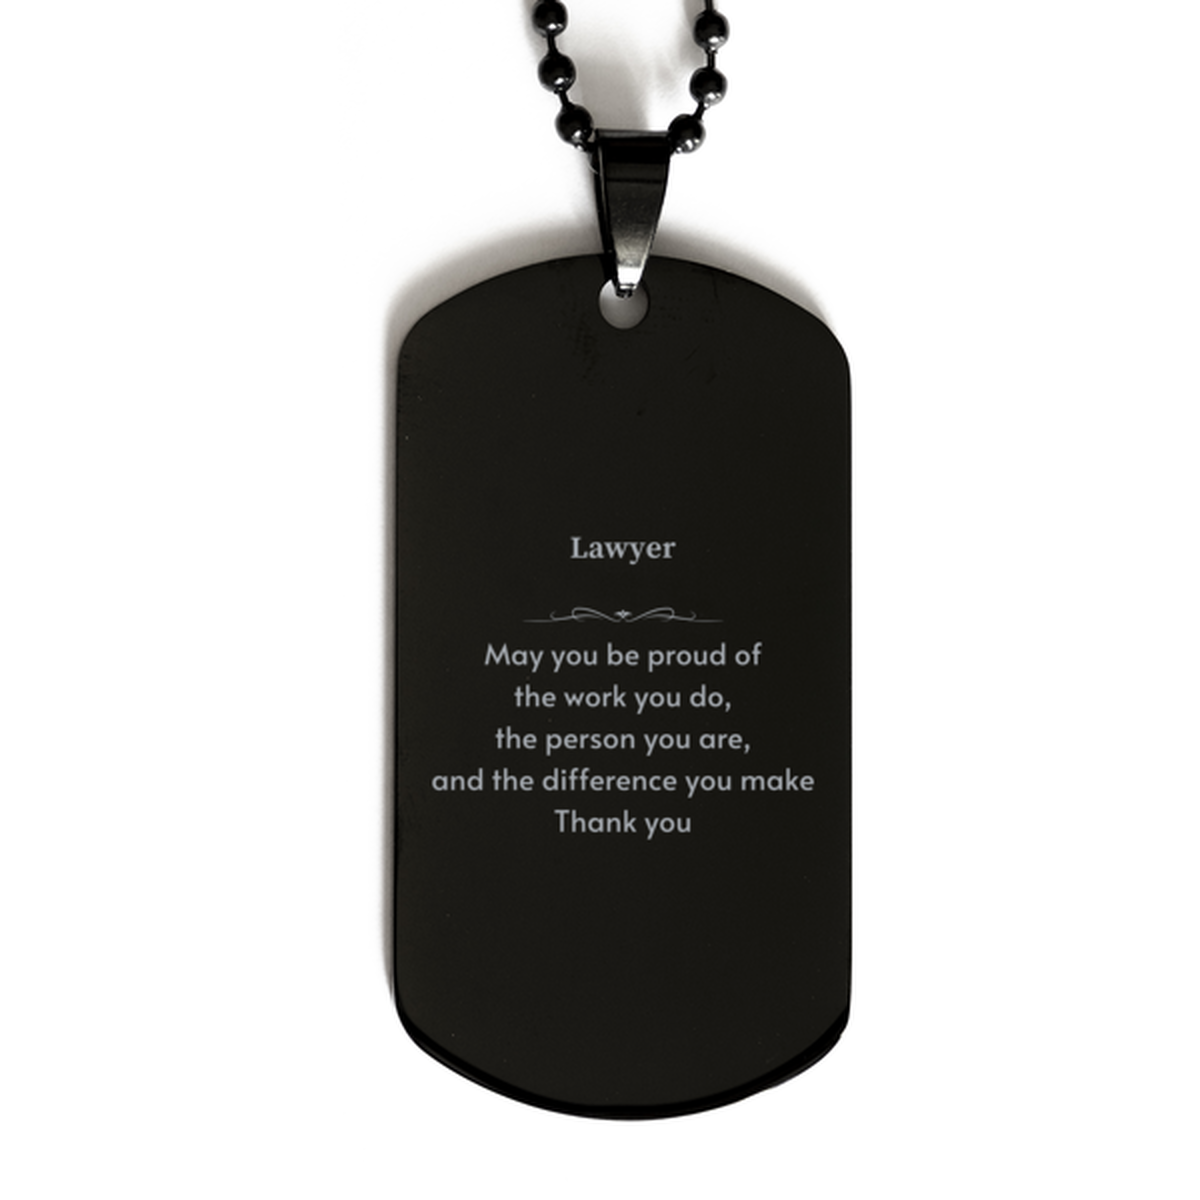 Heartwarming Black Dog Tag Retirement Coworkers Gifts for Lawyer, Lawyer May You be proud of the work you do, the person you are Gifts for Boss Men Women Friends